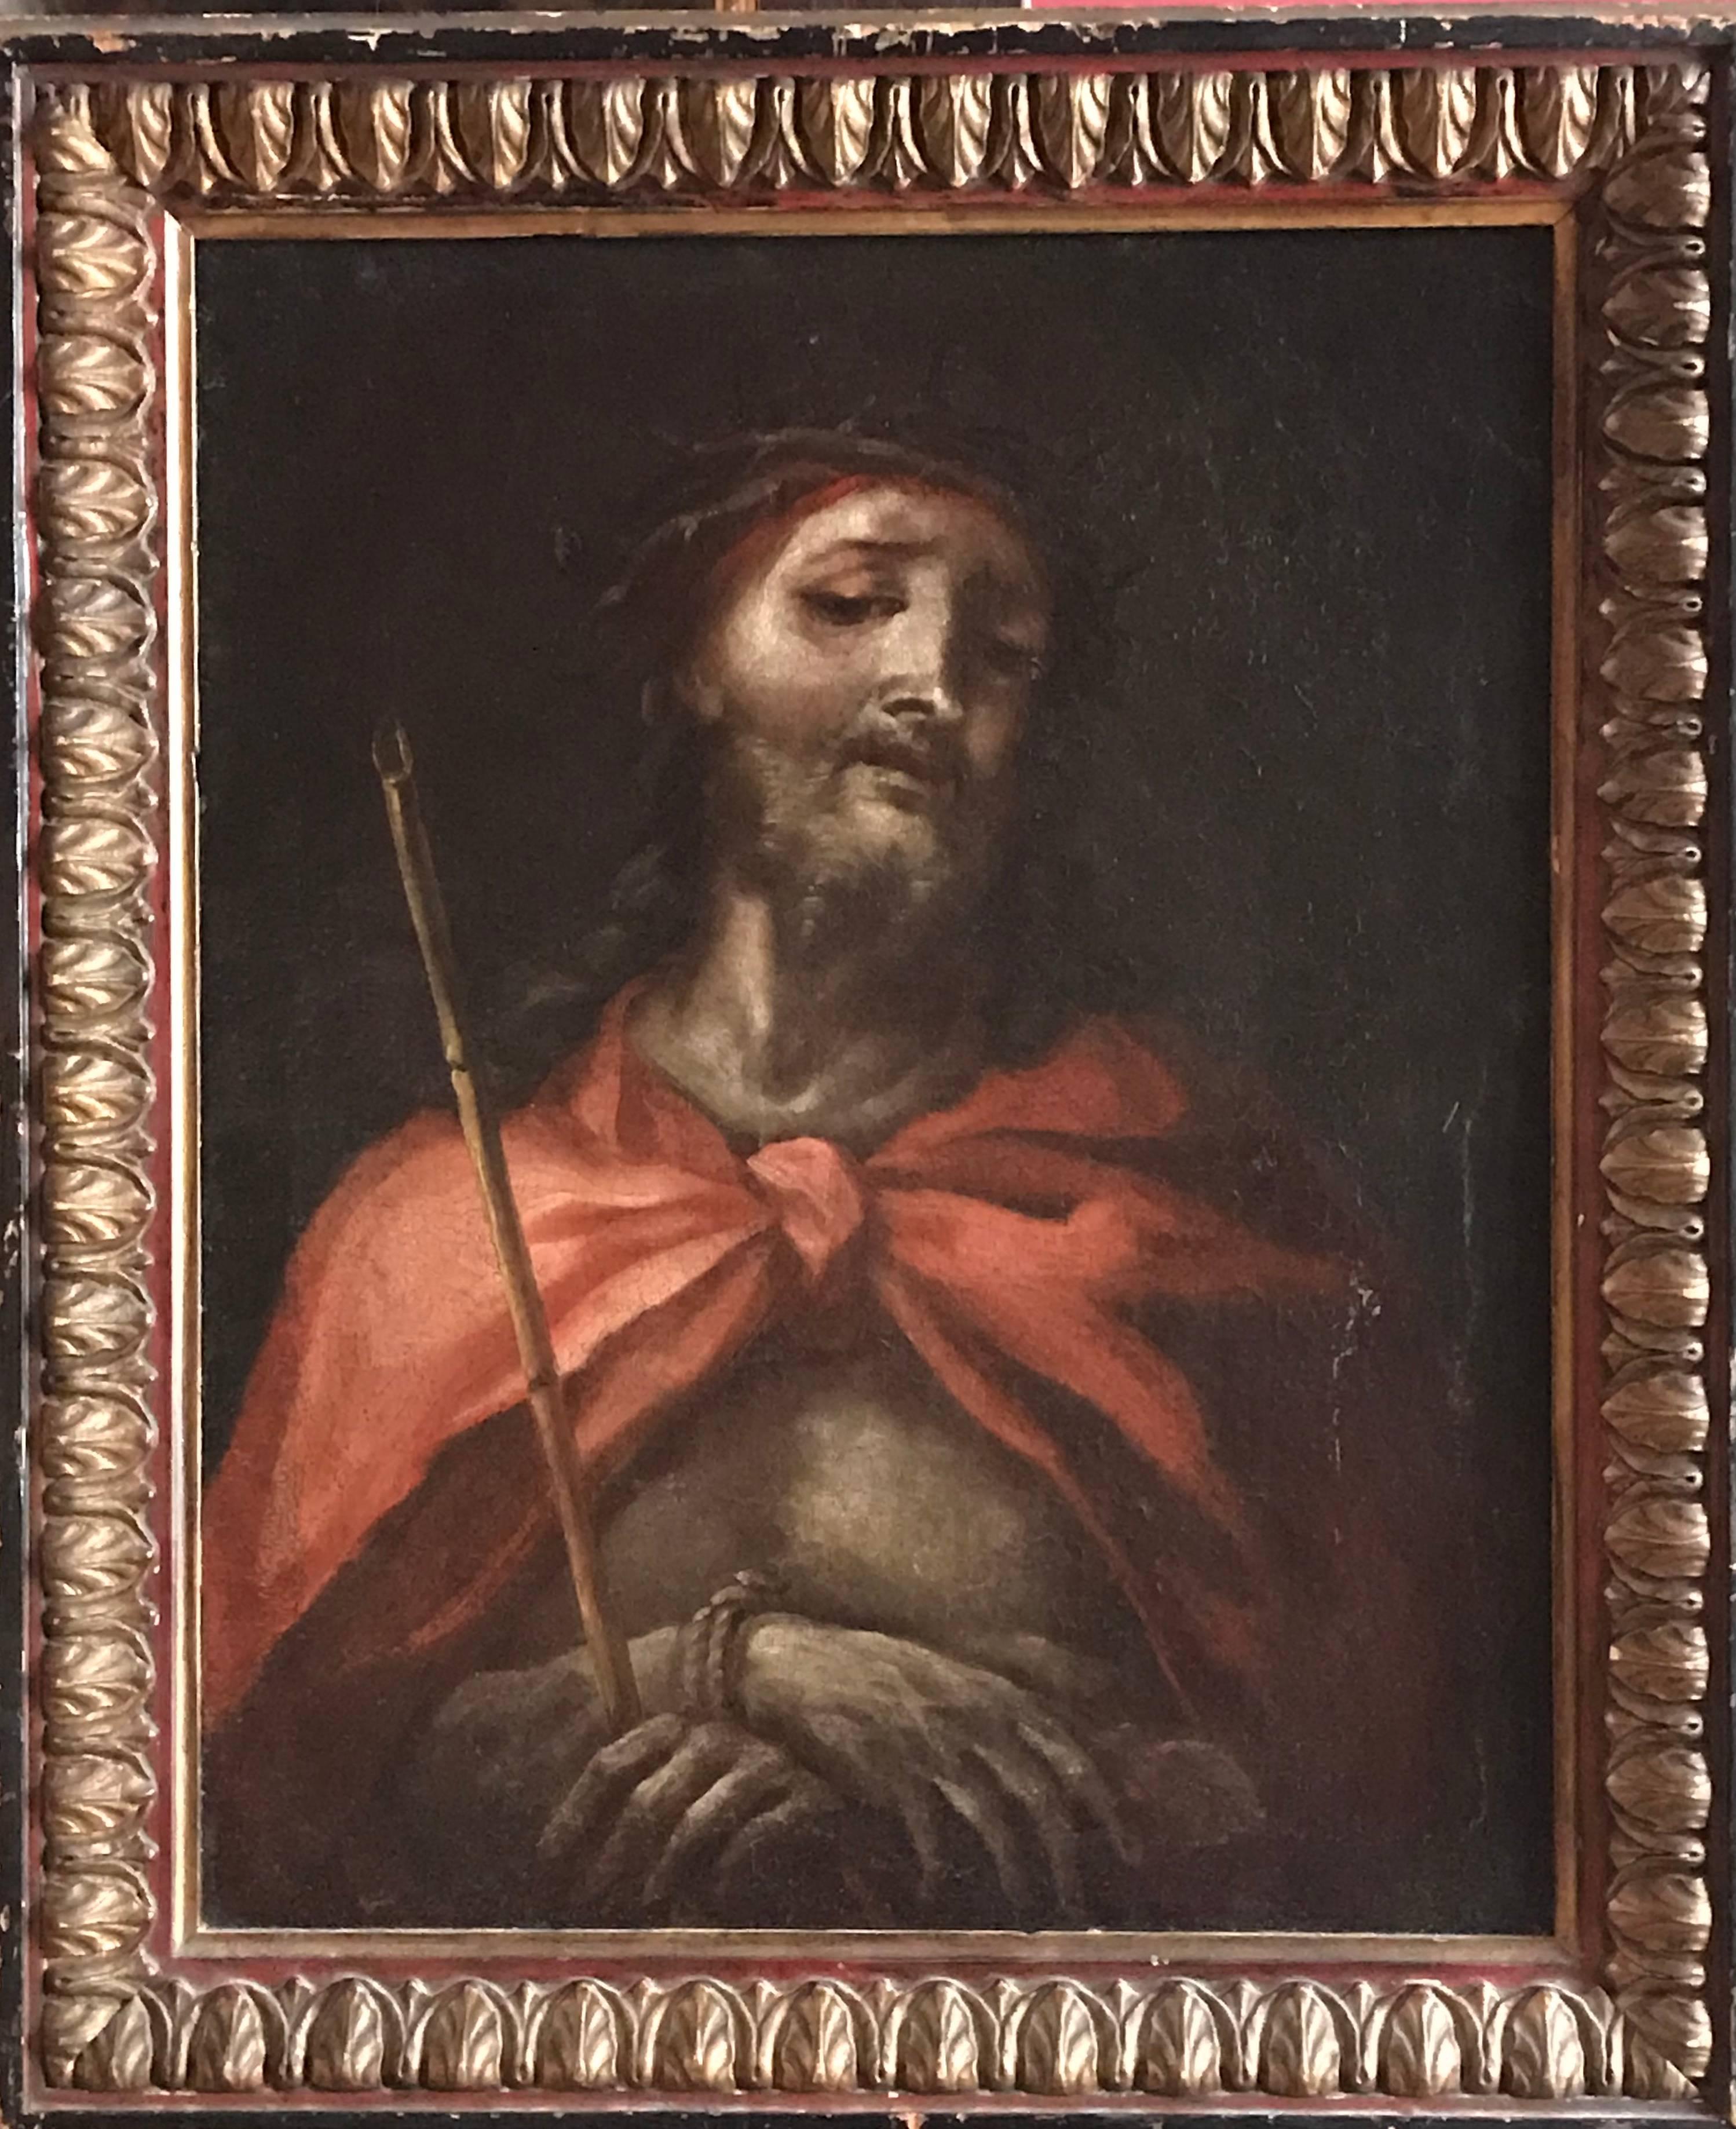 Unknown Portrait Painting - North Italian c.1600's Old Master Oil Painting - Ecce Homo Christ with Thorns